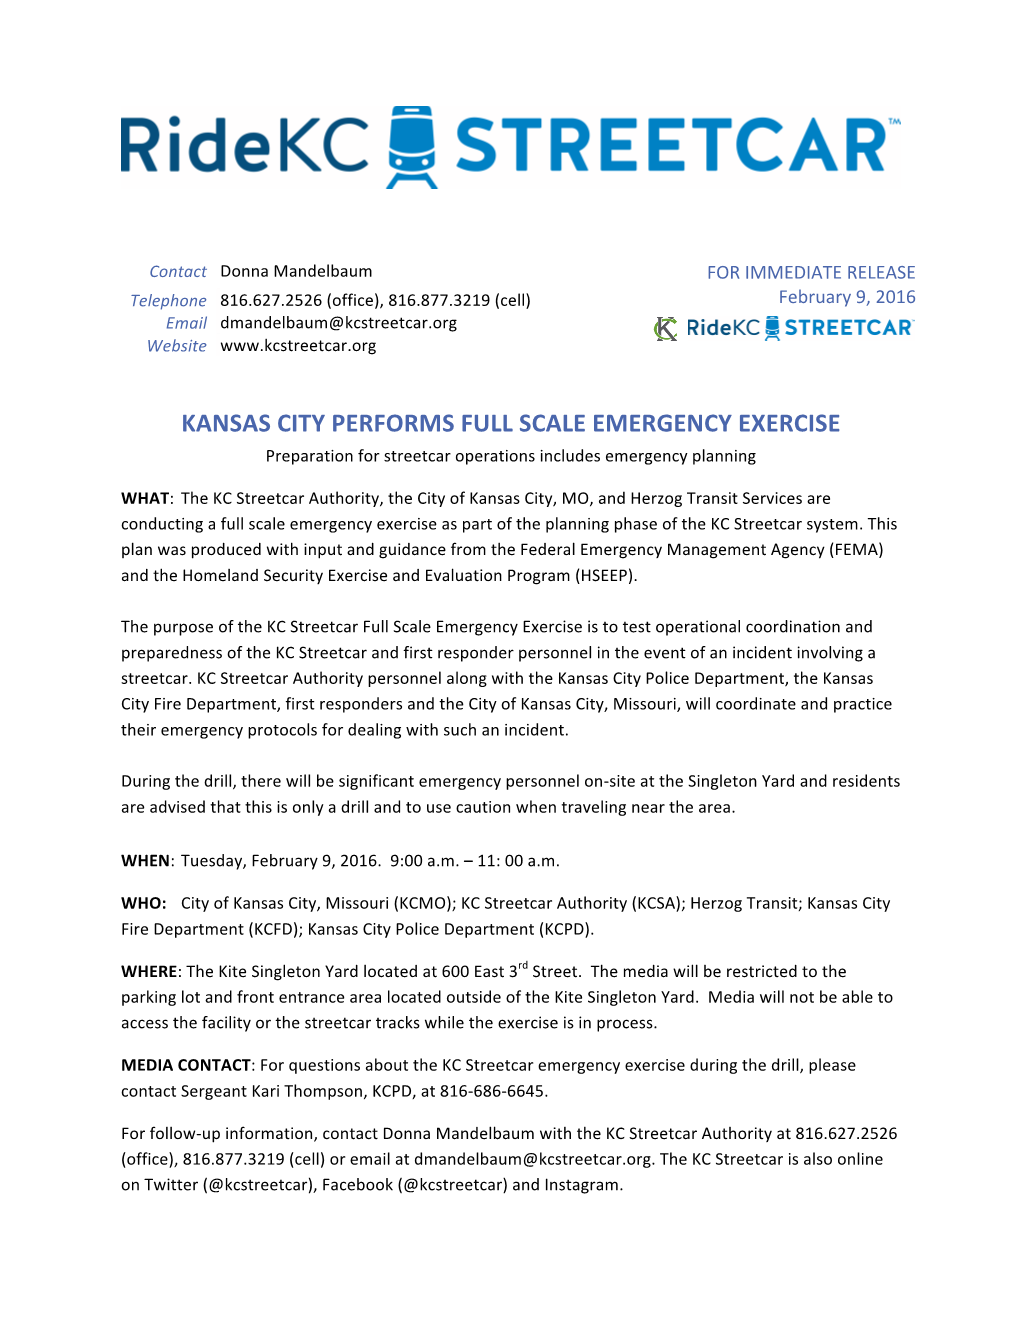 KANSAS CITY PERFORMS FULL SCALE EMERGENCY EXERCISE Preparation for Streetcar Operations Includes Emergency Planning